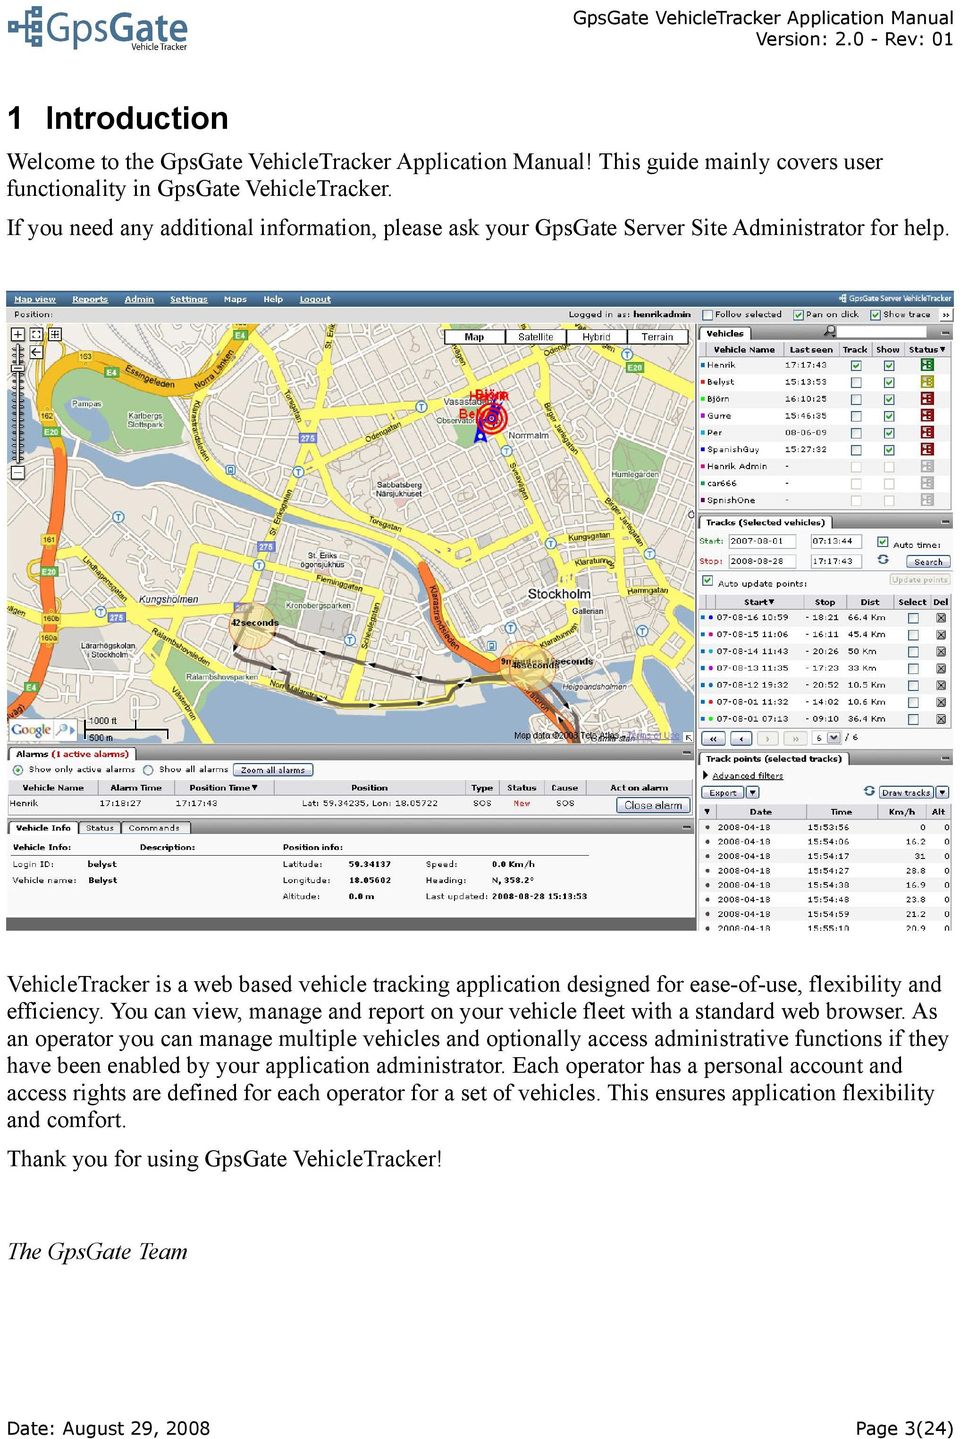 VehicleTracker is a web based vehicle tracking application designed for ease-of-use, flexibility and efficiency. You can view, manage and report on your vehicle fleet with a standard web browser.